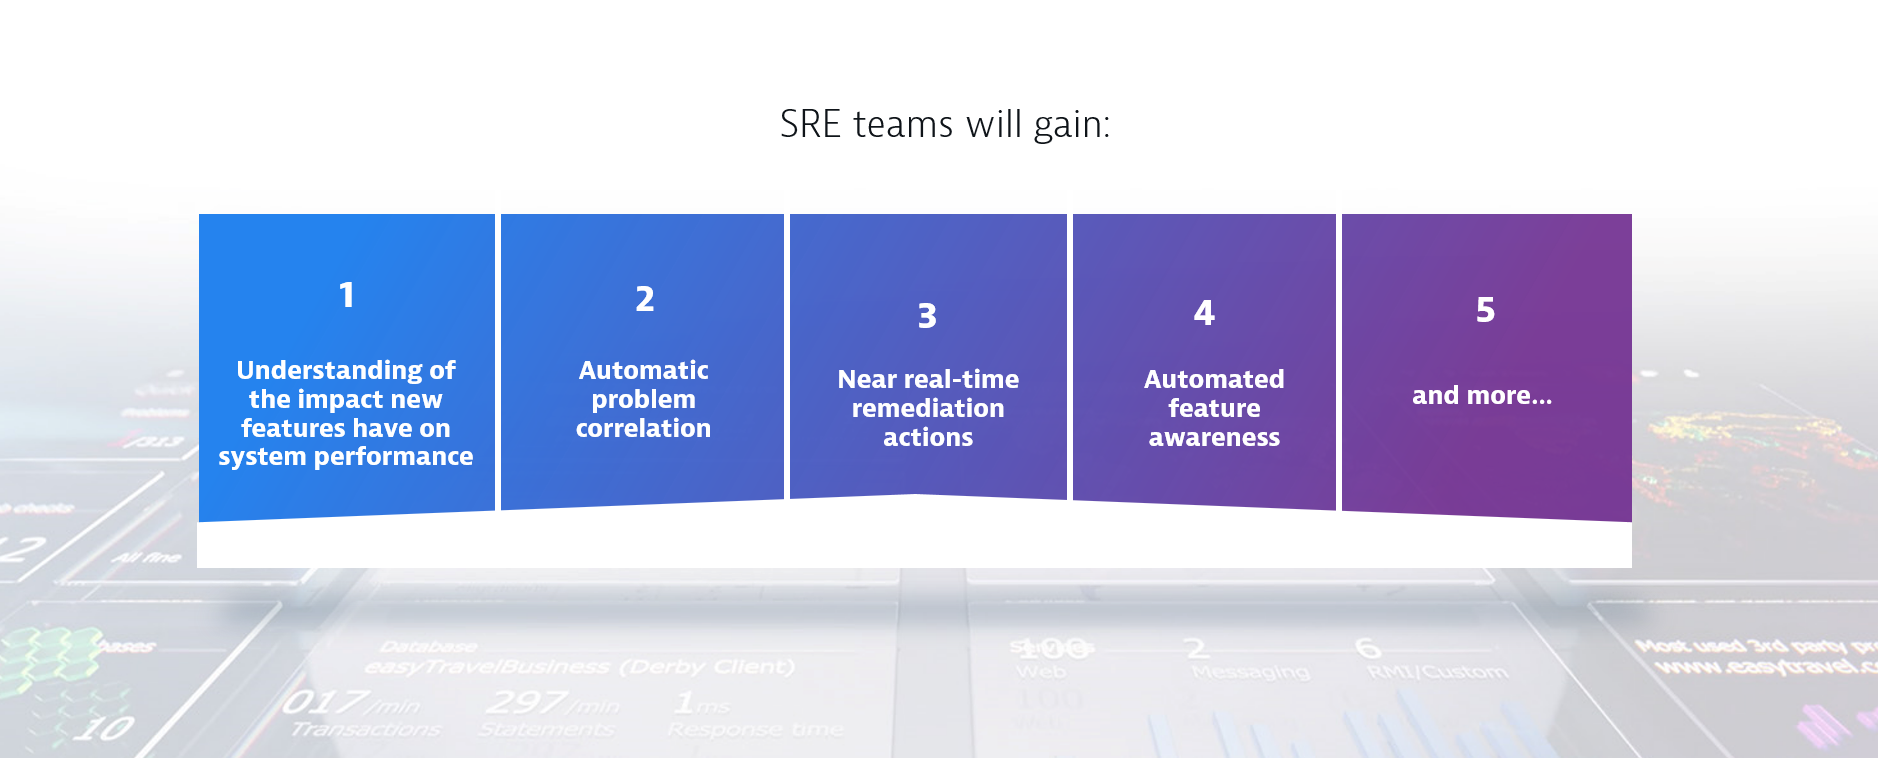 Benefits of OpenFeature and Dynatrace for SRE teams